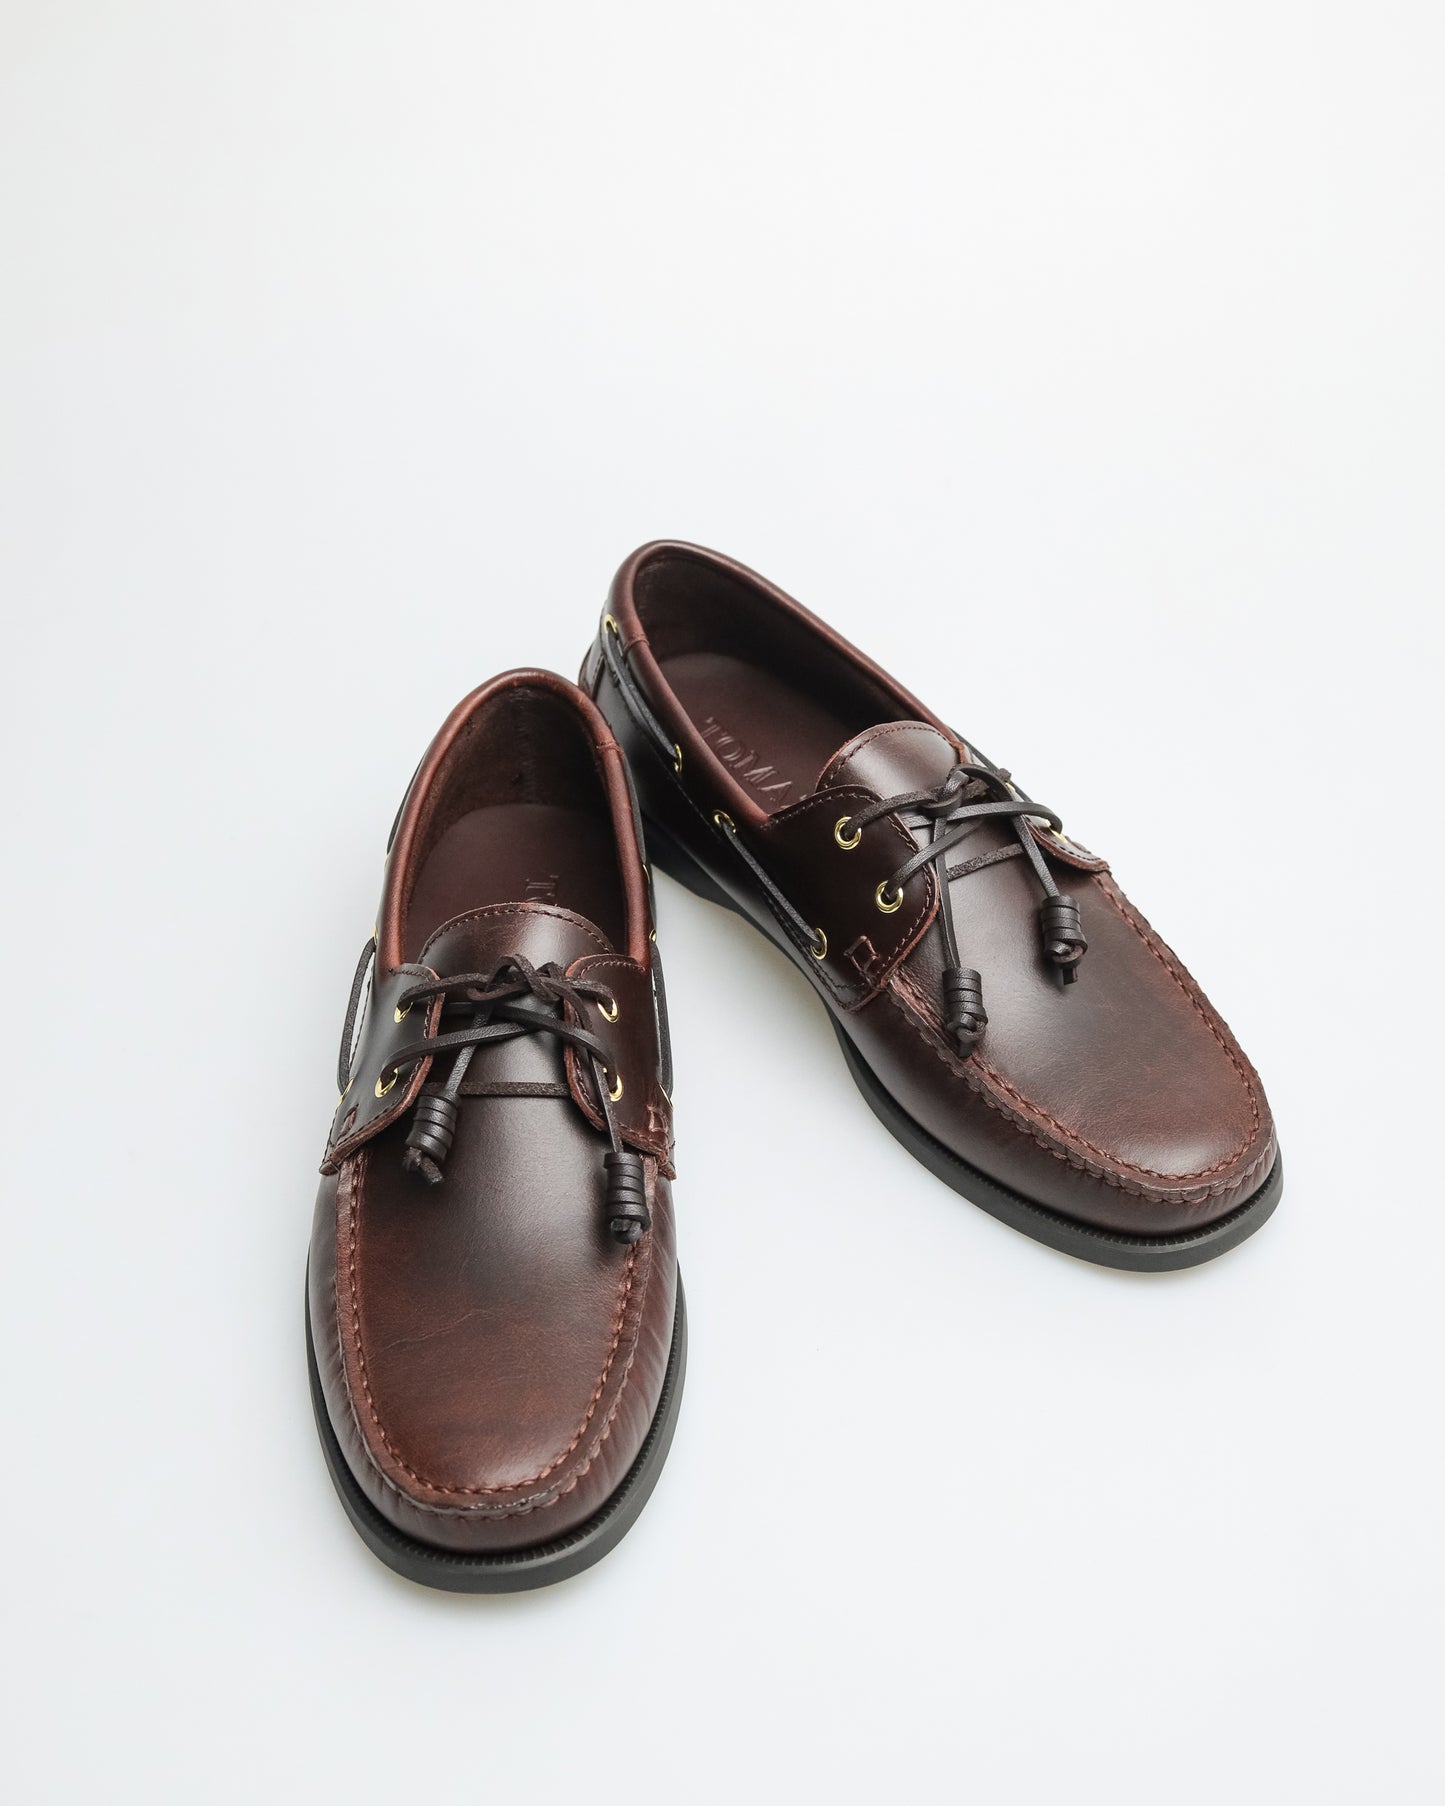 Tomaz C328 Men's Leather Boat Shoes (Coffee)